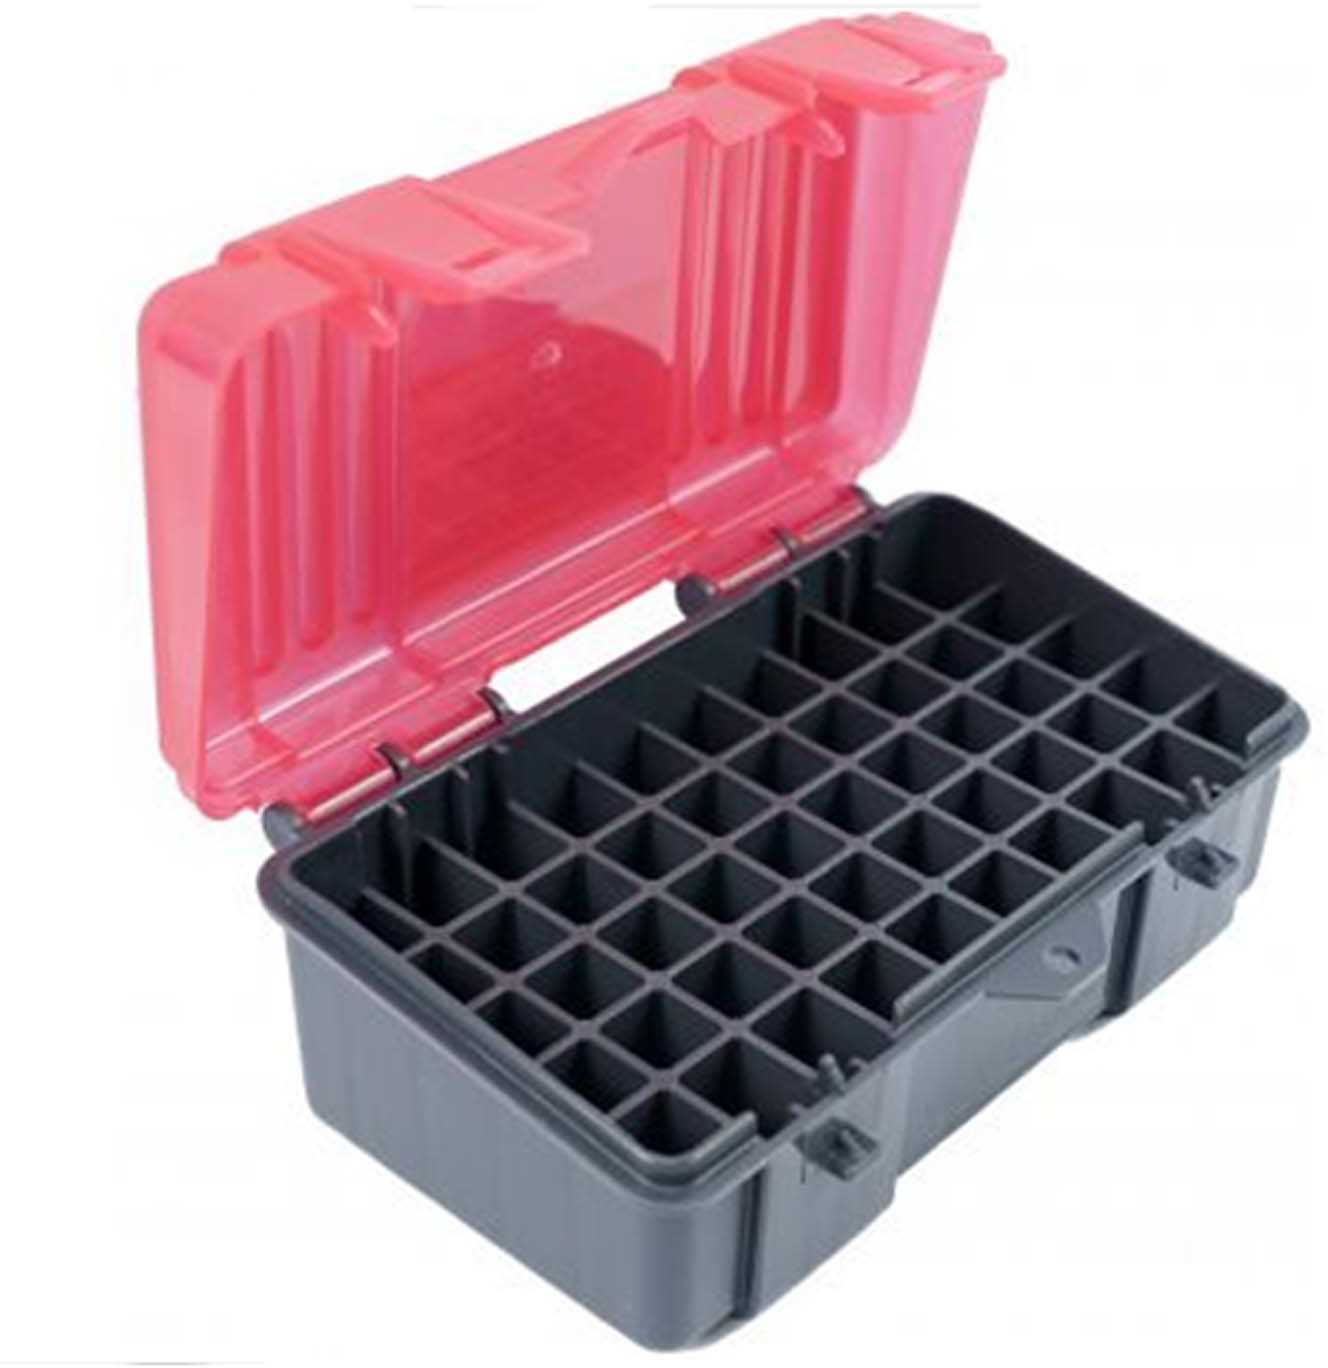 Plano Ammunition Box Holds 50 Rounds of .357/.38 Sp/.38 Handgun Charcoal/Rose 6 Pack 1225-50